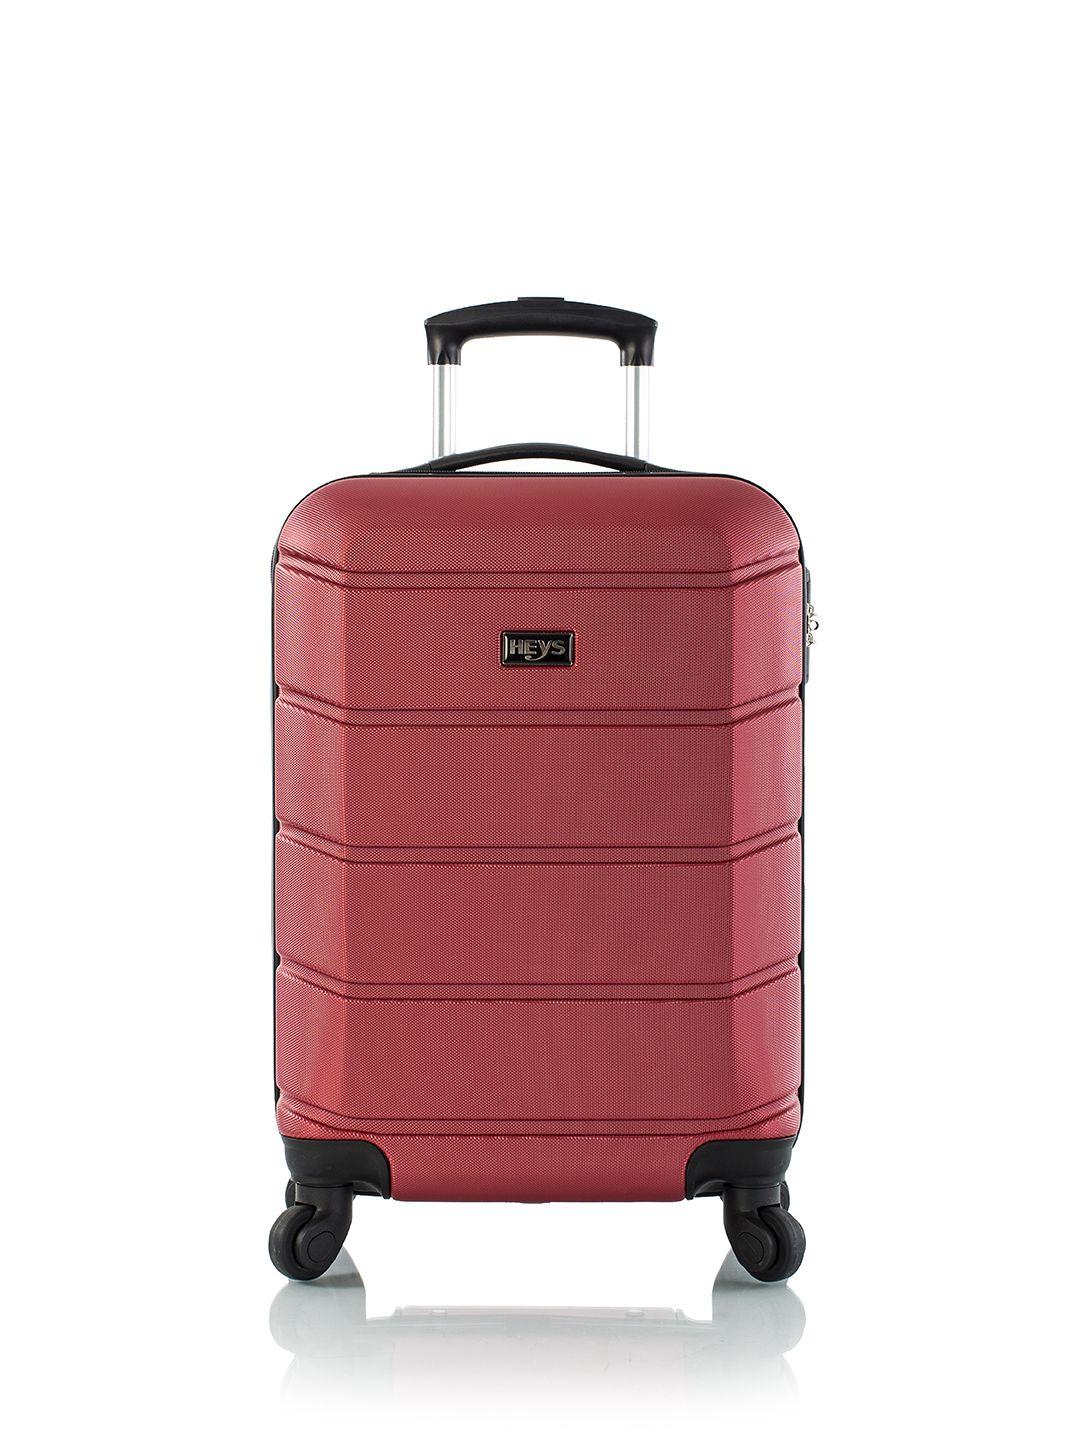 heys textured hard-sided cabin trolley suitcase